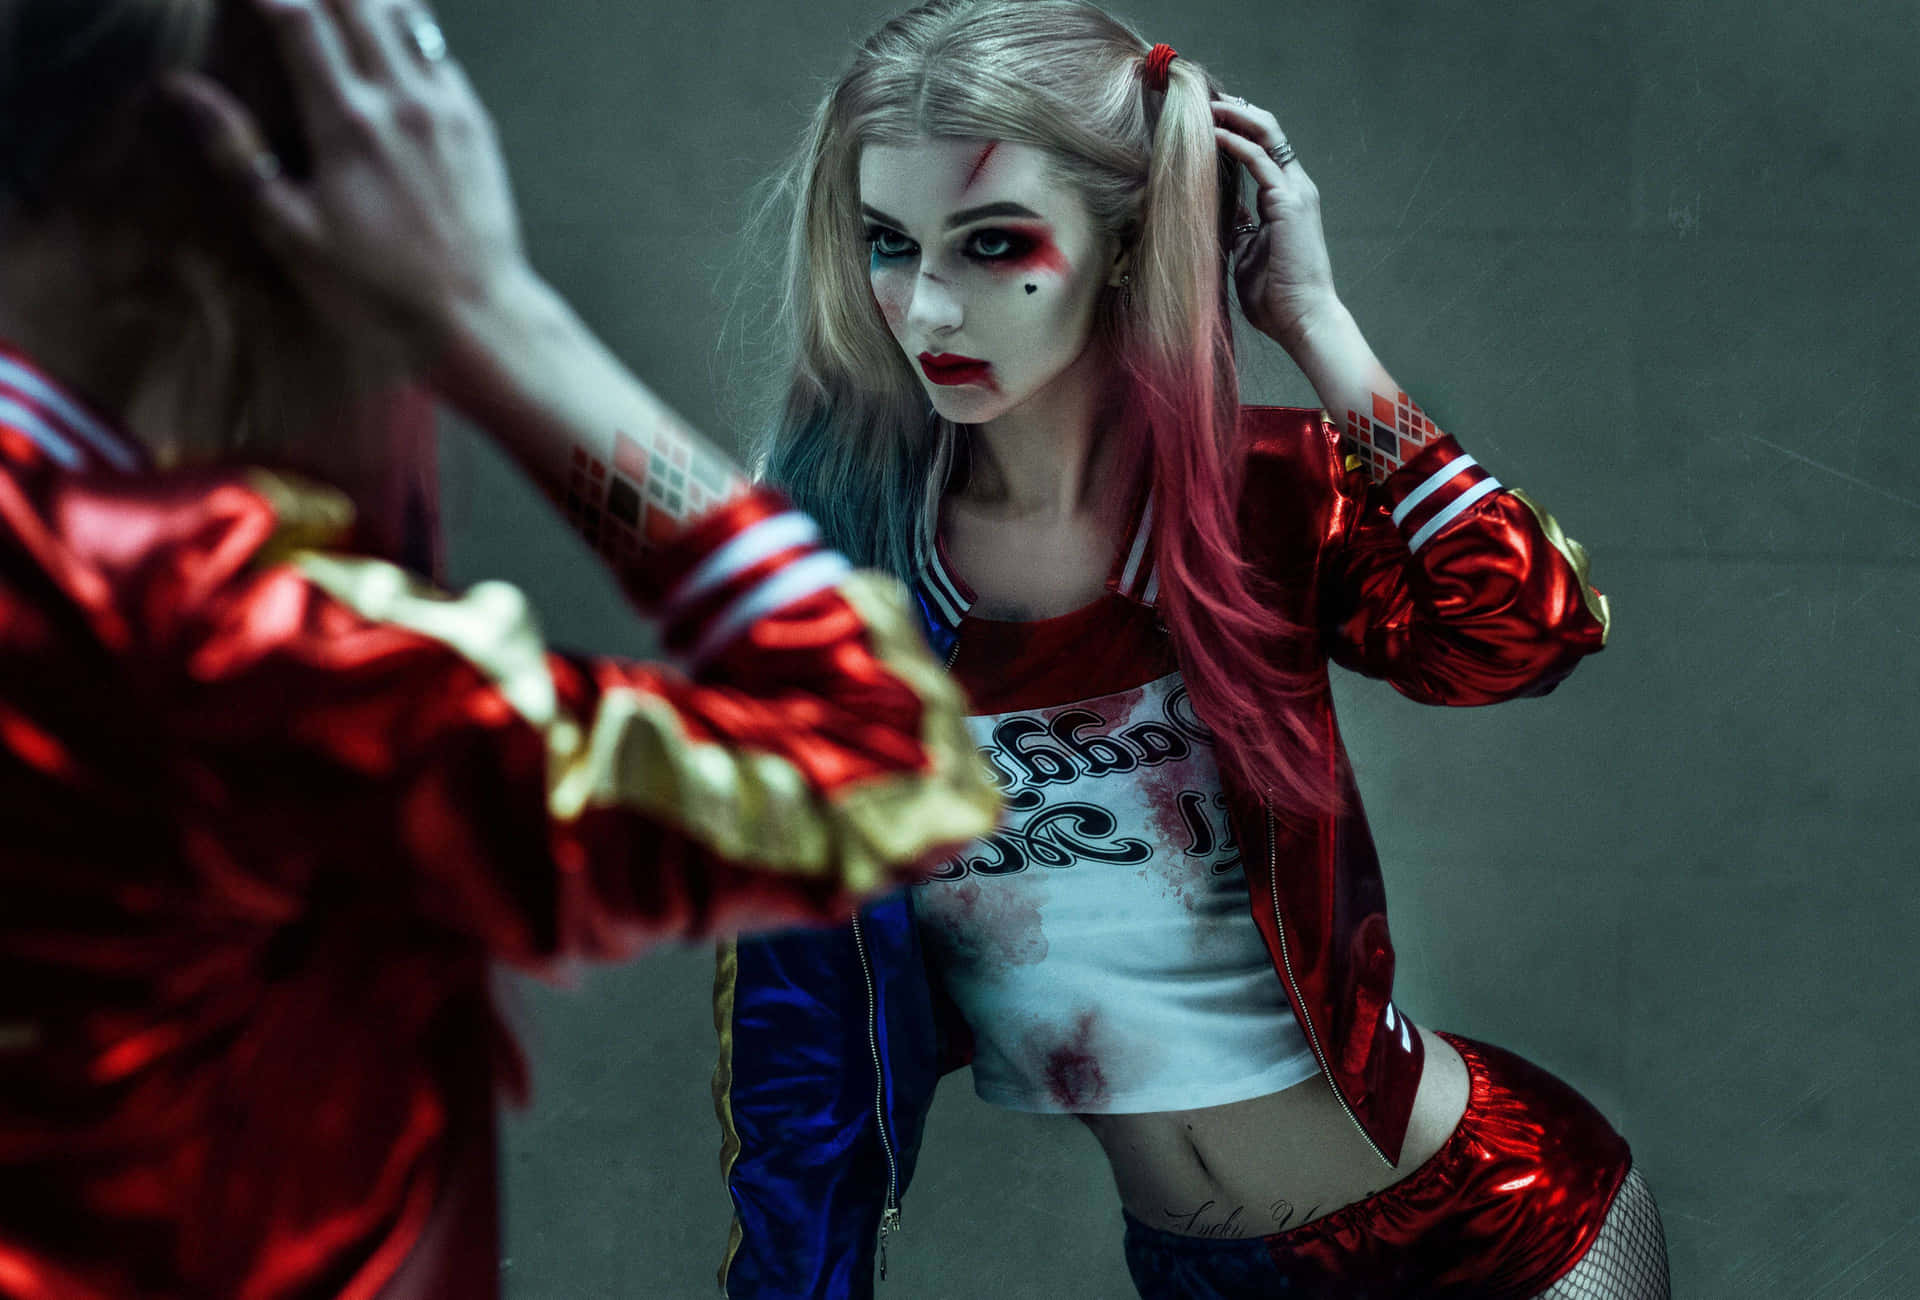 Captivating Harley Quinn Cosplay in Action Wallpaper